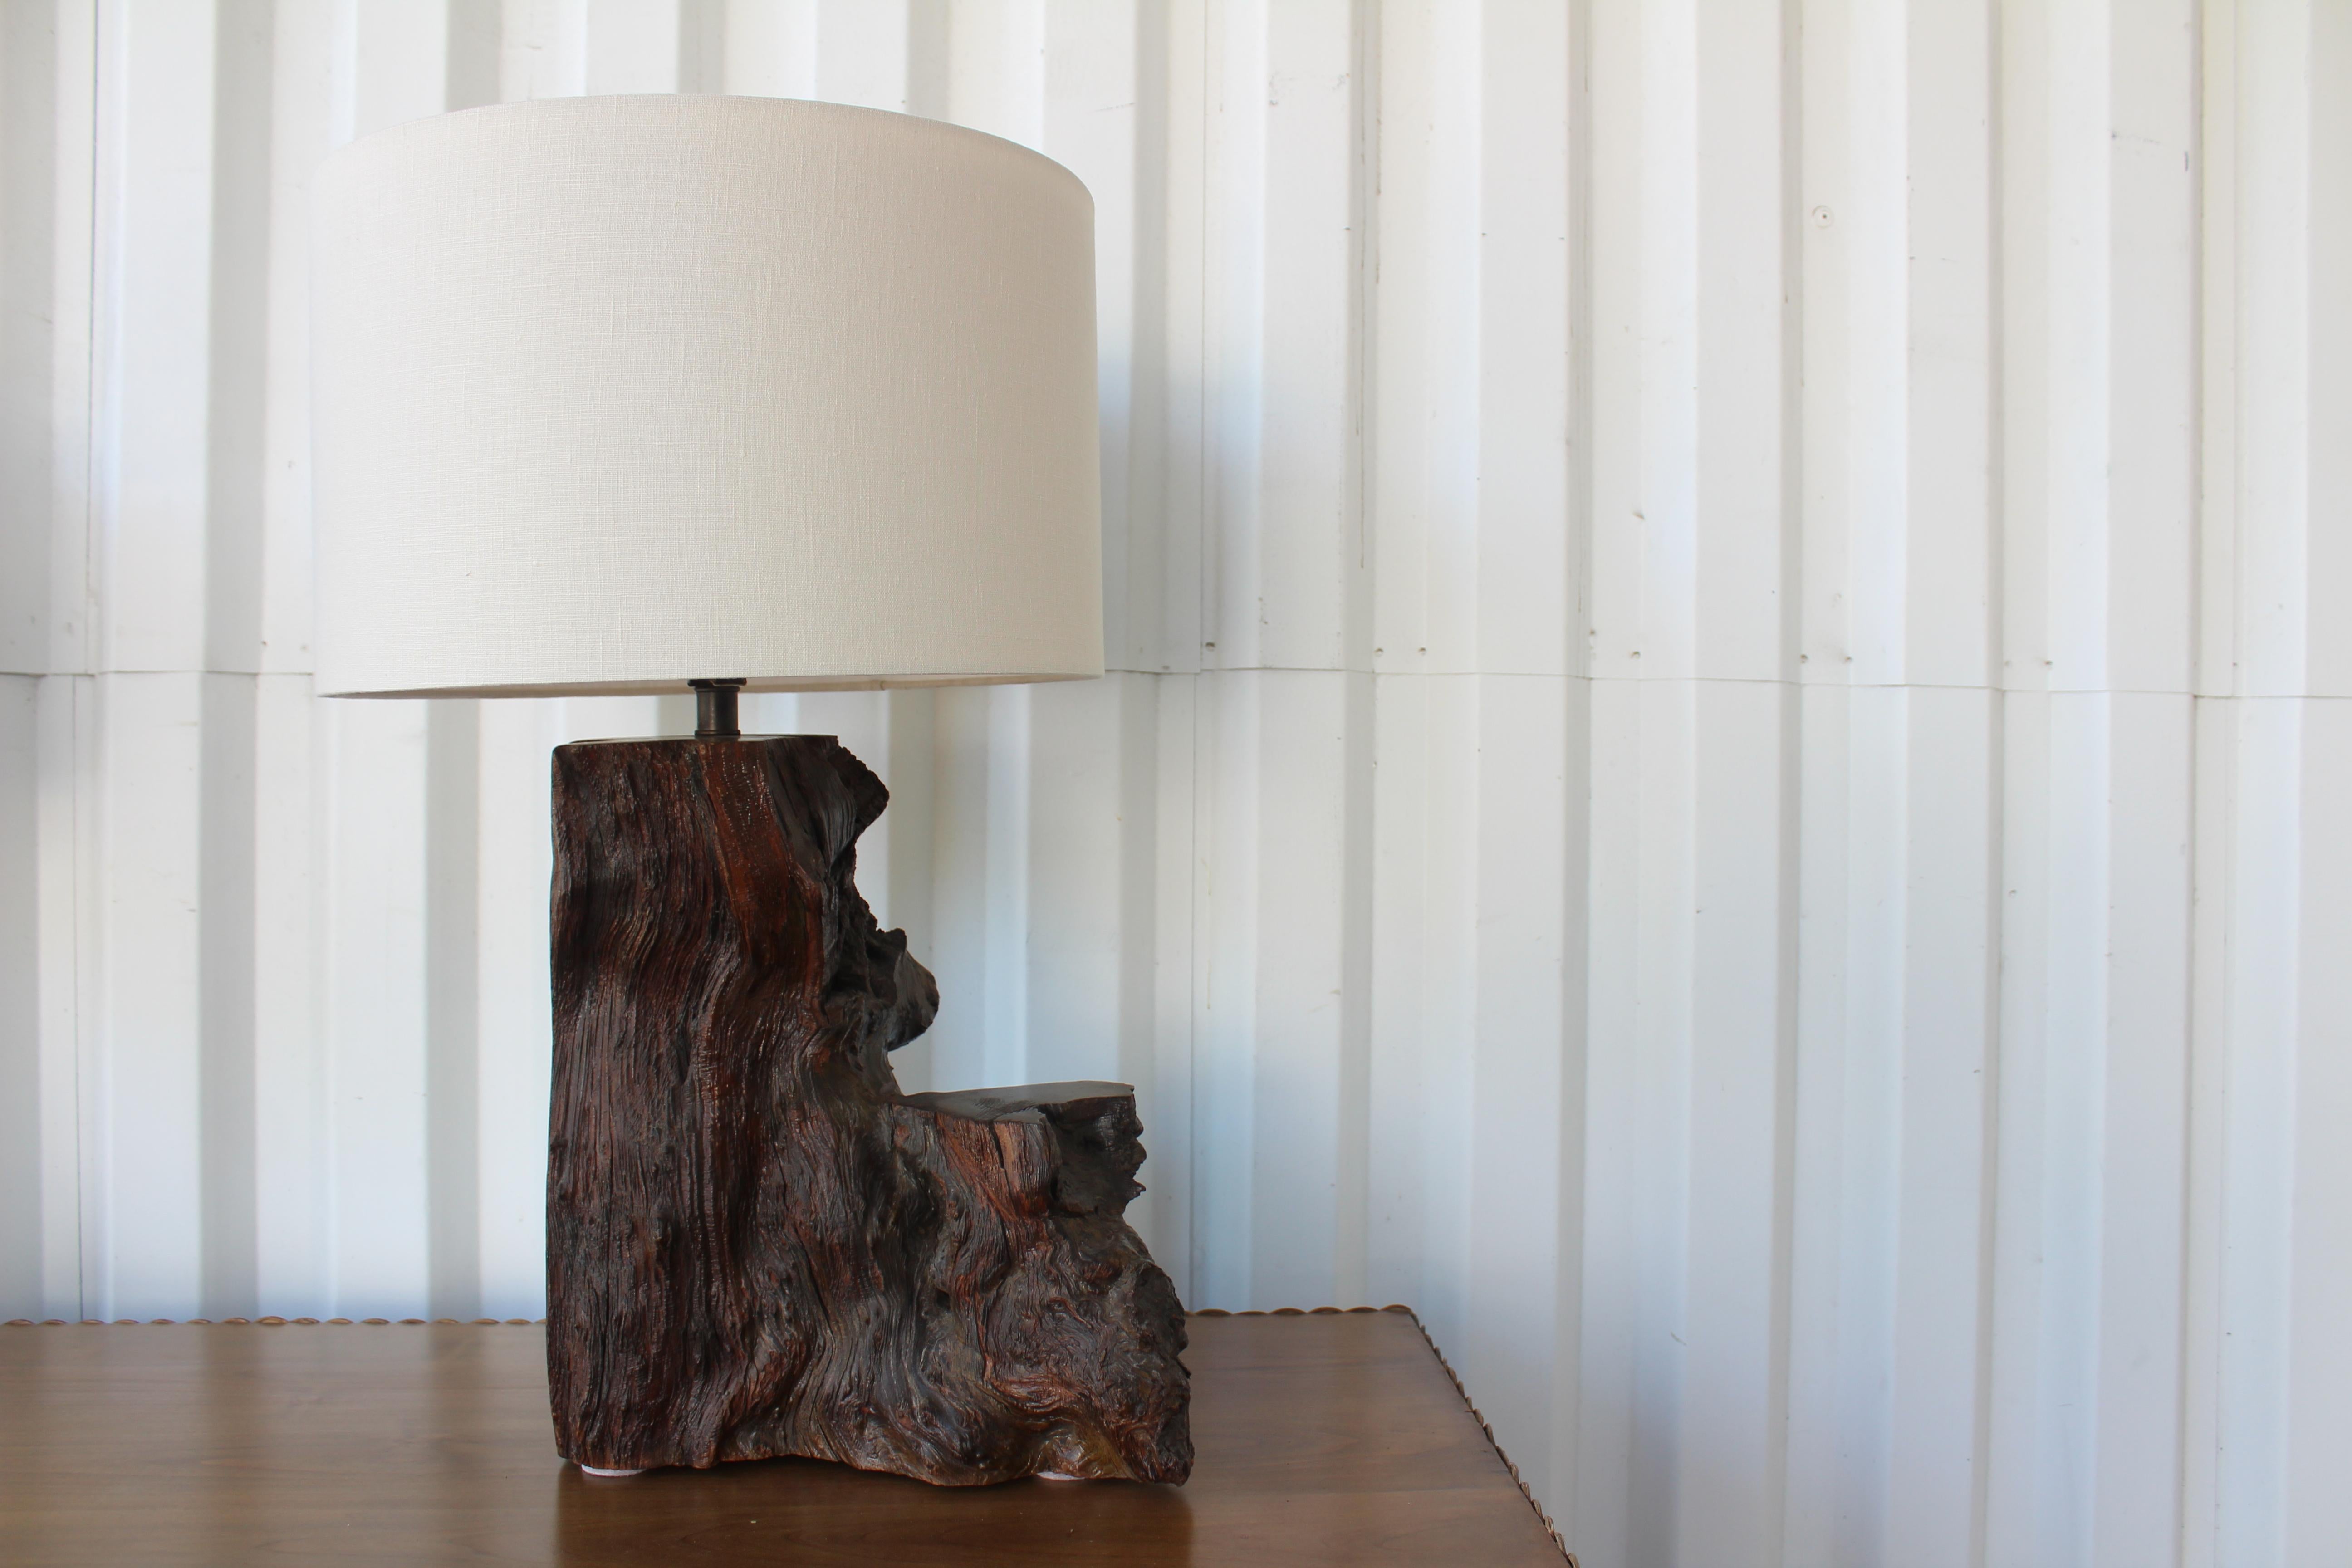 Vintage 1970s burl wood lamp. Newly rewired and fitted with a custom made shade in Belgian linen. 
Measures: 26